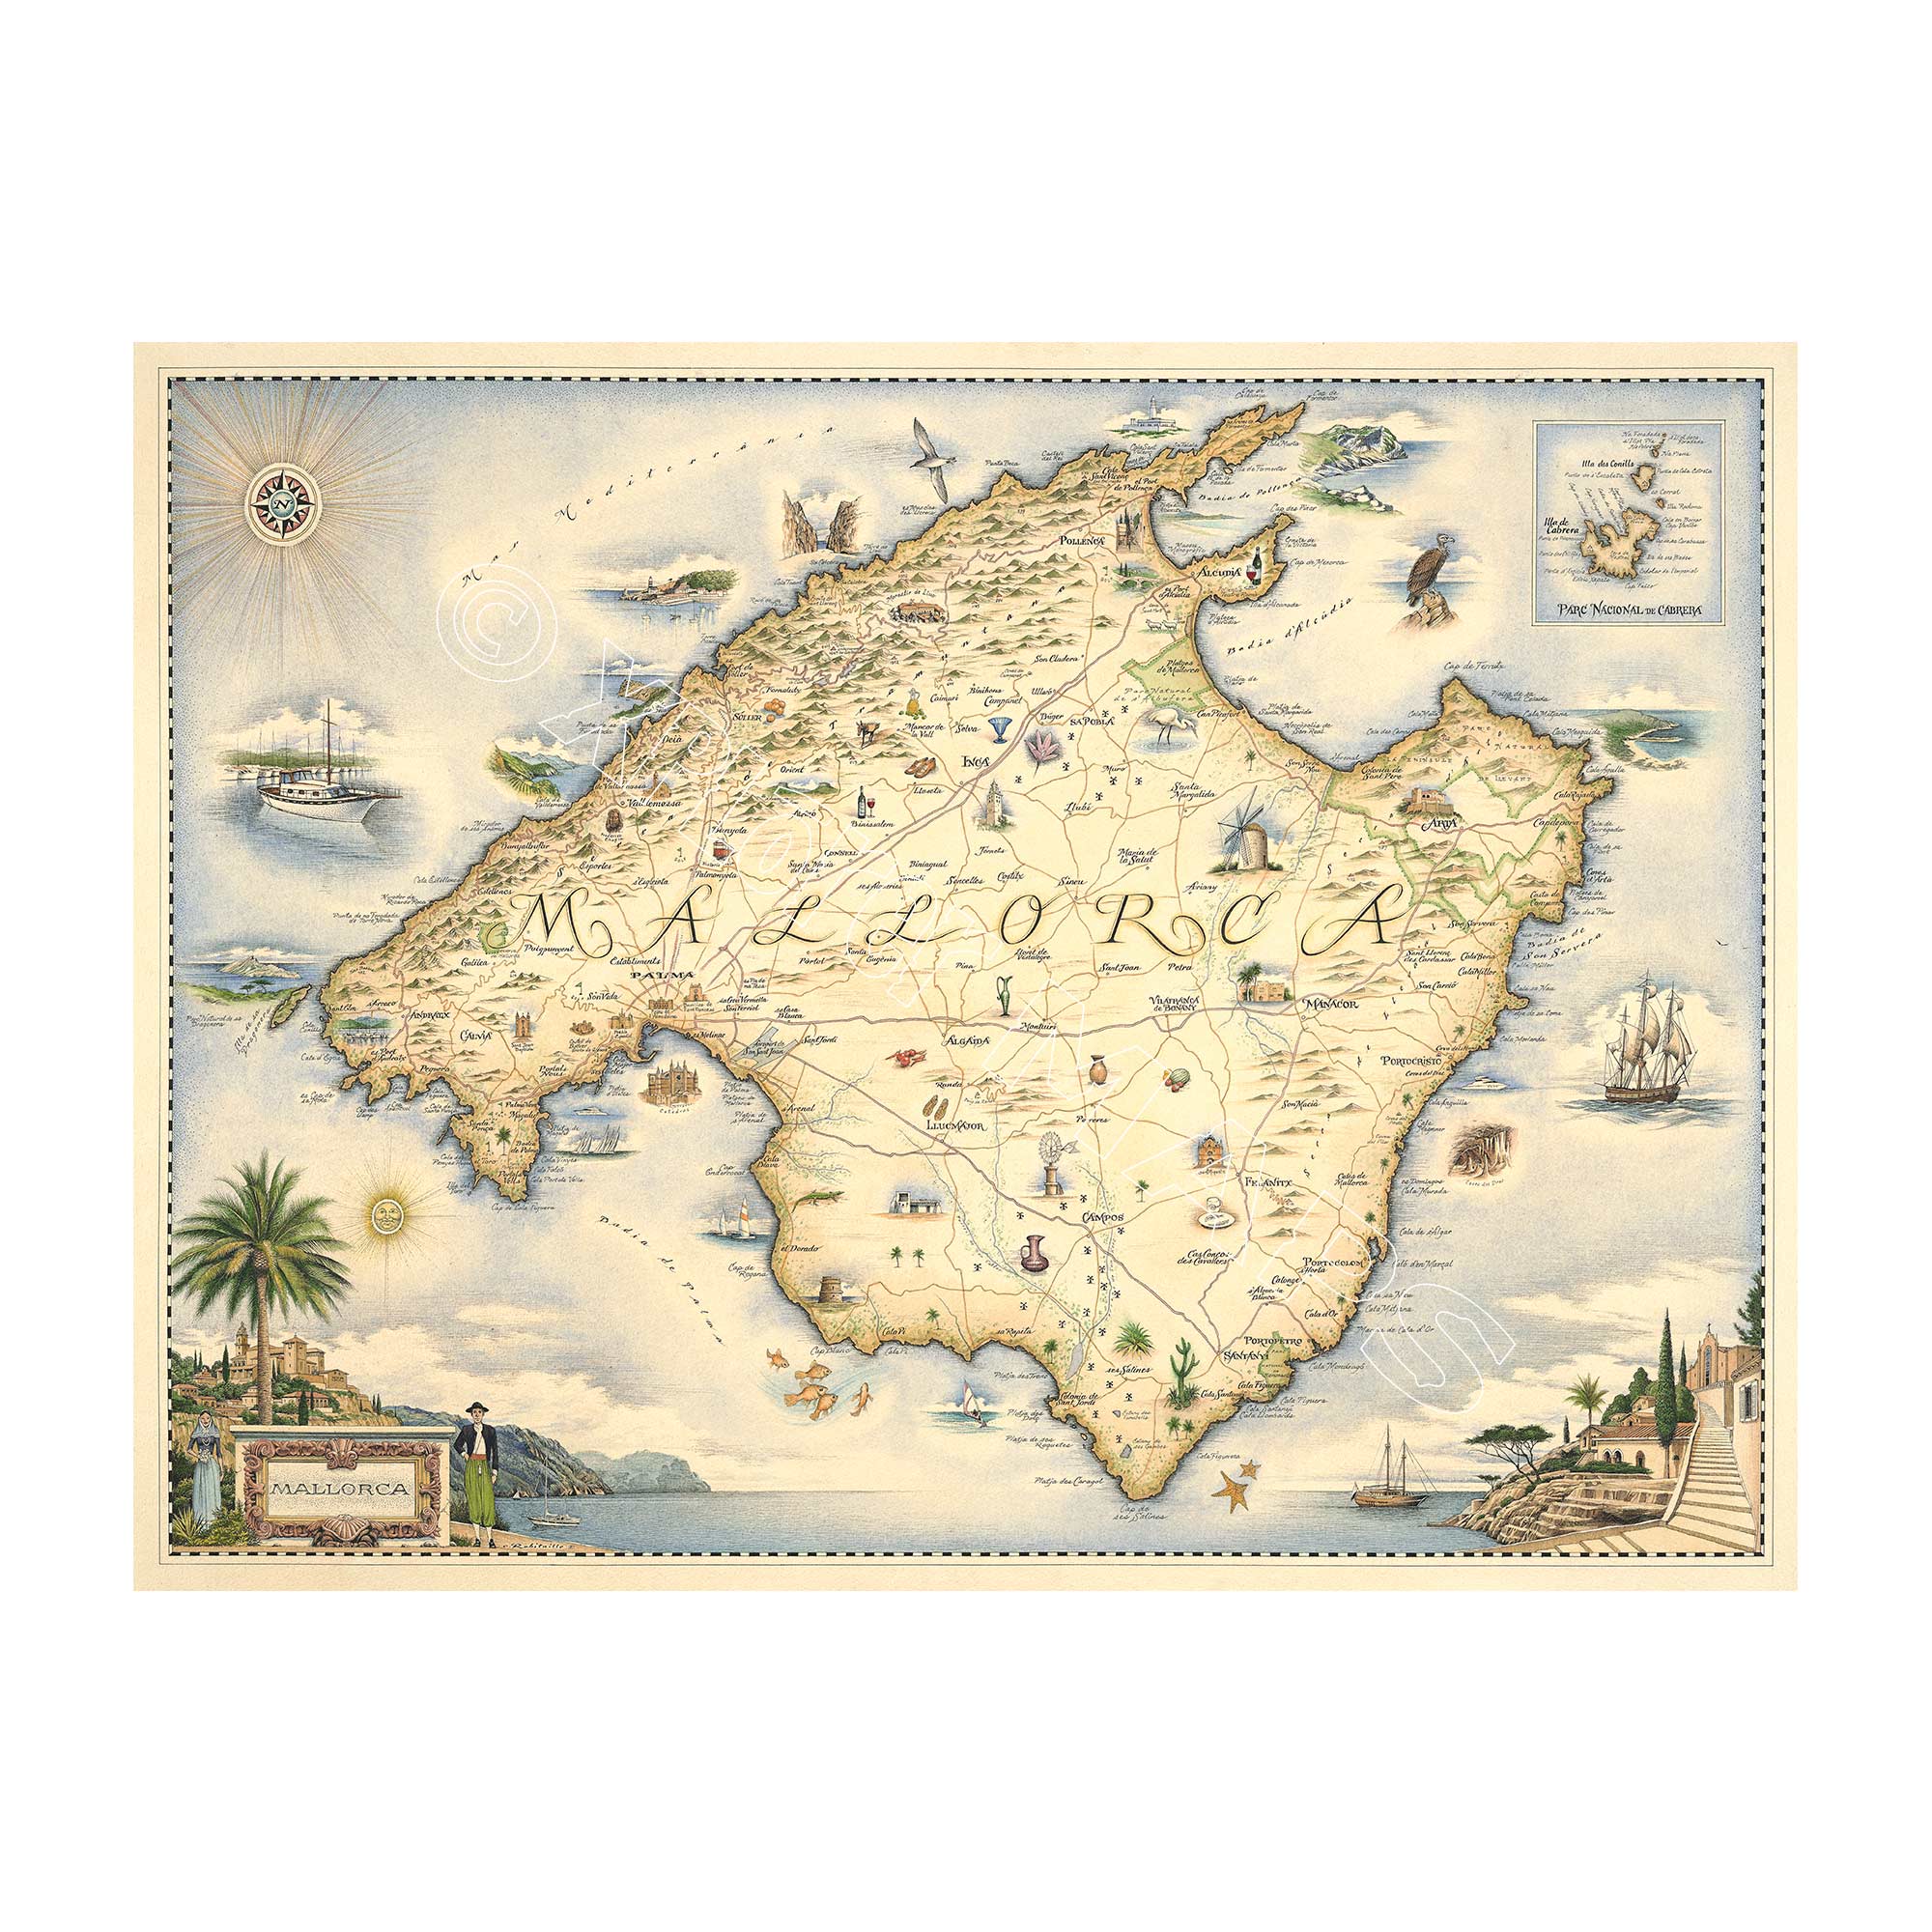 Mallorca Island hand-drawn map in earth tones brown and beige. Located off the coast of Spain. The map  Includes illustrations of Capital Palma, Moorish Almudaina royal palace, and 13th-century Santa María Cathedral. Flora & Fauna including birds, fish, Palm Trees, and Starfish.Measures 24x18.